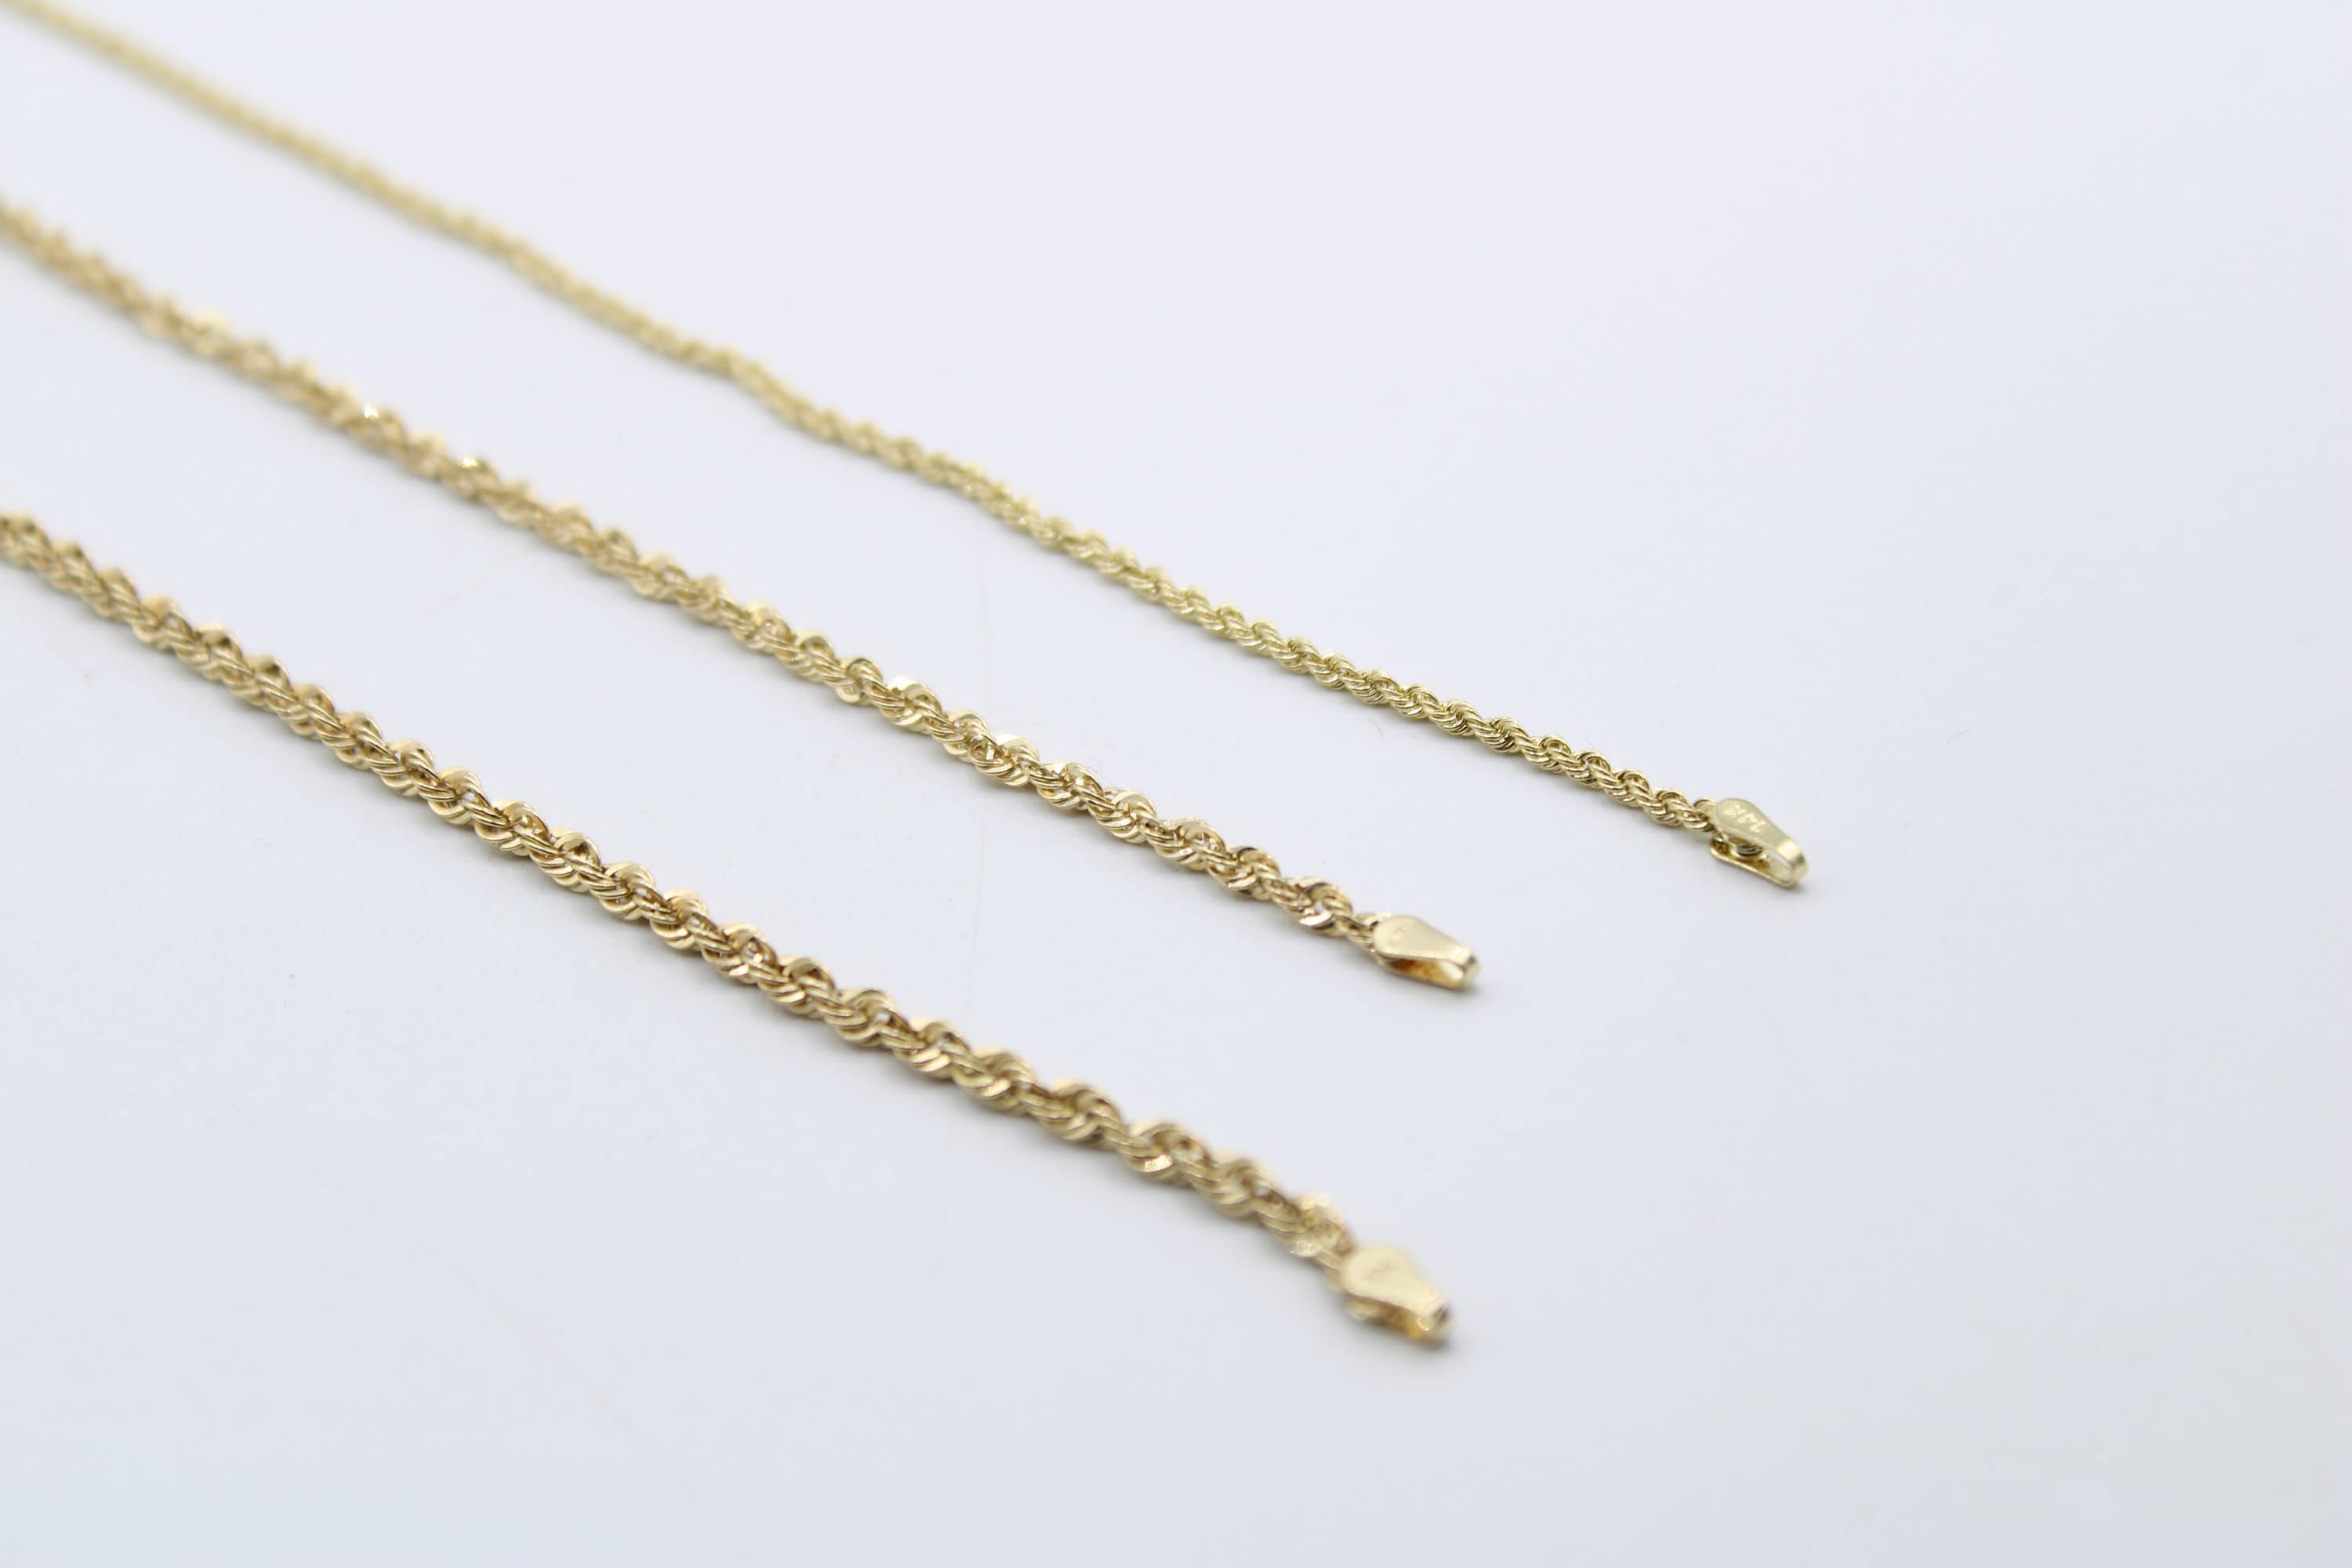 Gold Textured Rope Chain - Gold Plated - The Jewelry Plug 14K Solid Gold / 20 Inches / 5mm